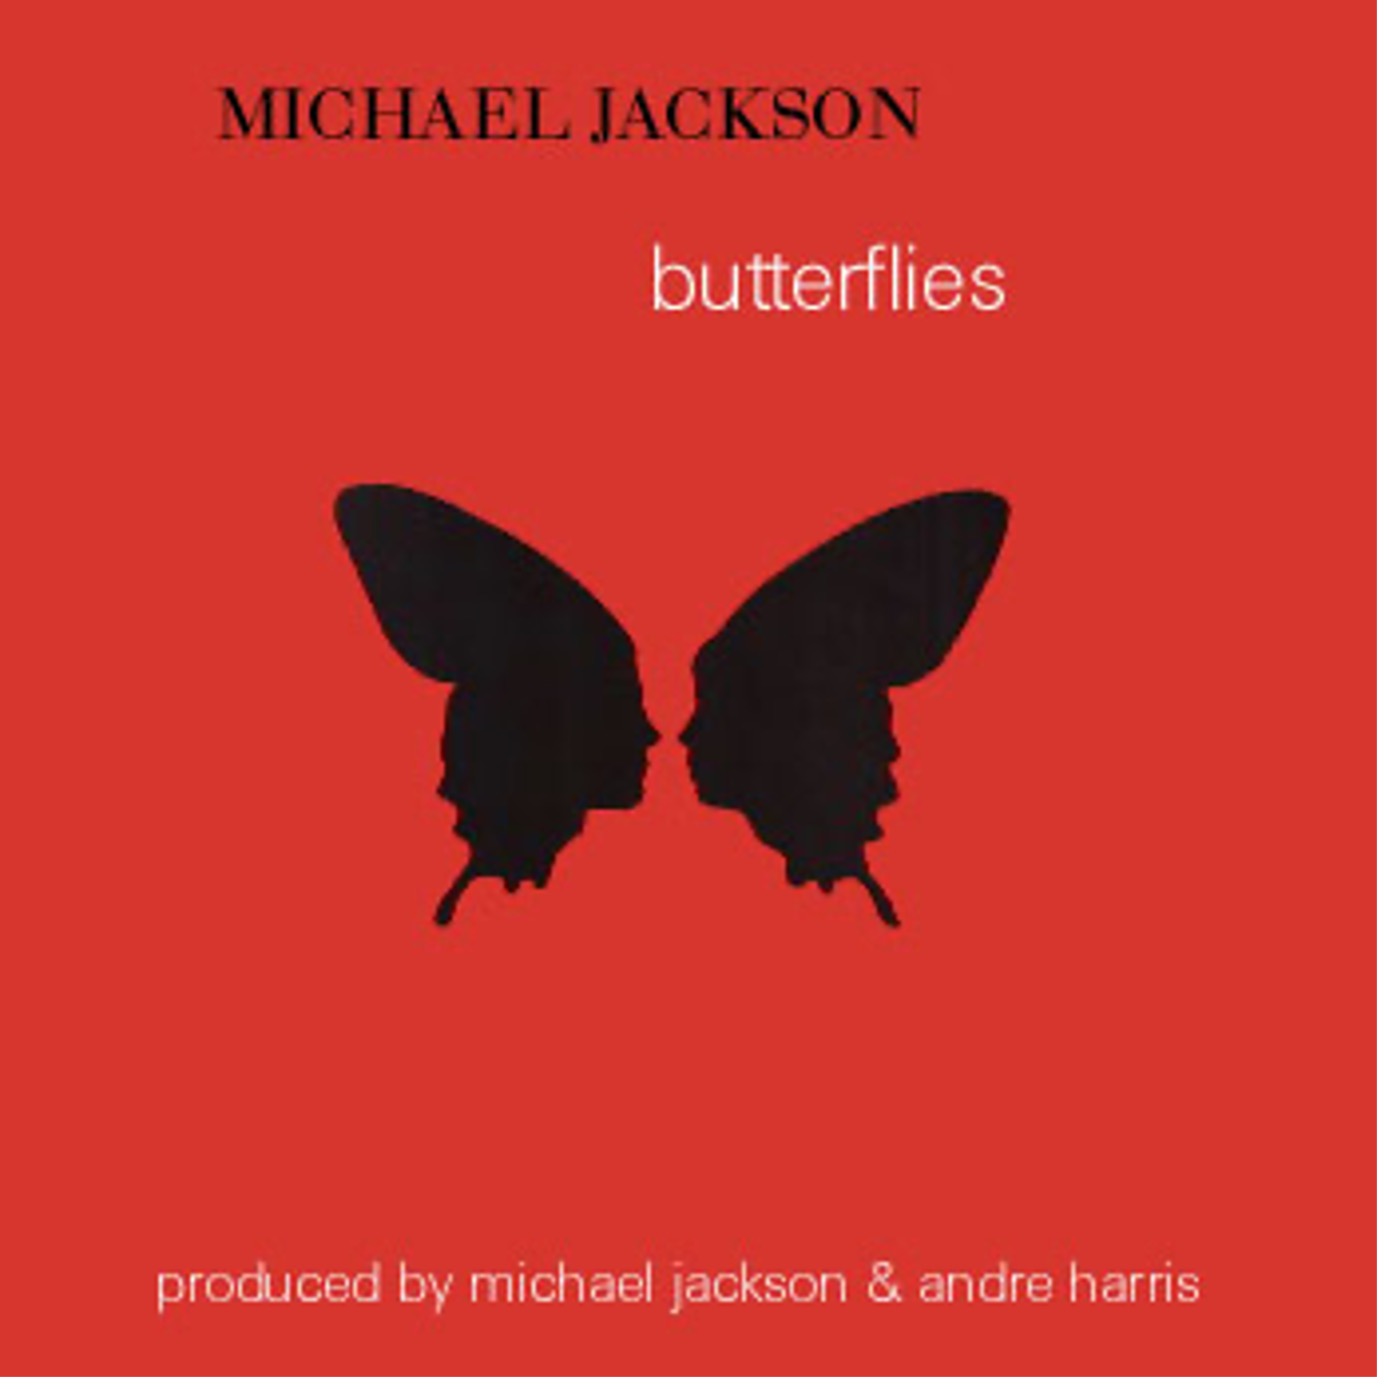 Michael Jackson’s ‘Butterflies’ An Example Of Evolving His Sound